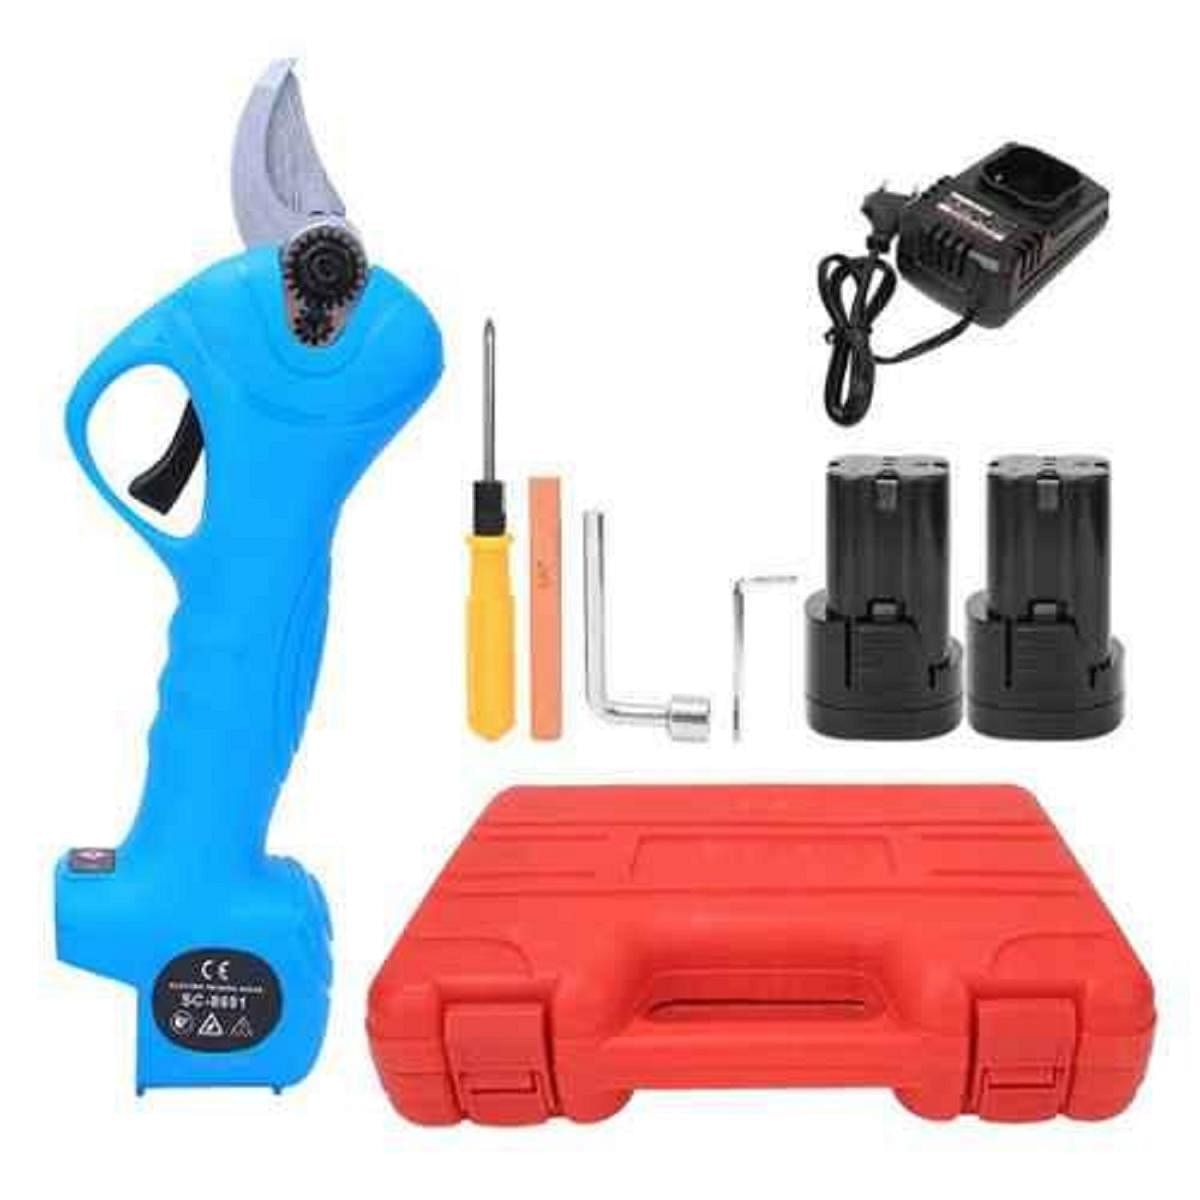 Pruning kit. Price: Rs 14,608 at industrybuying.com